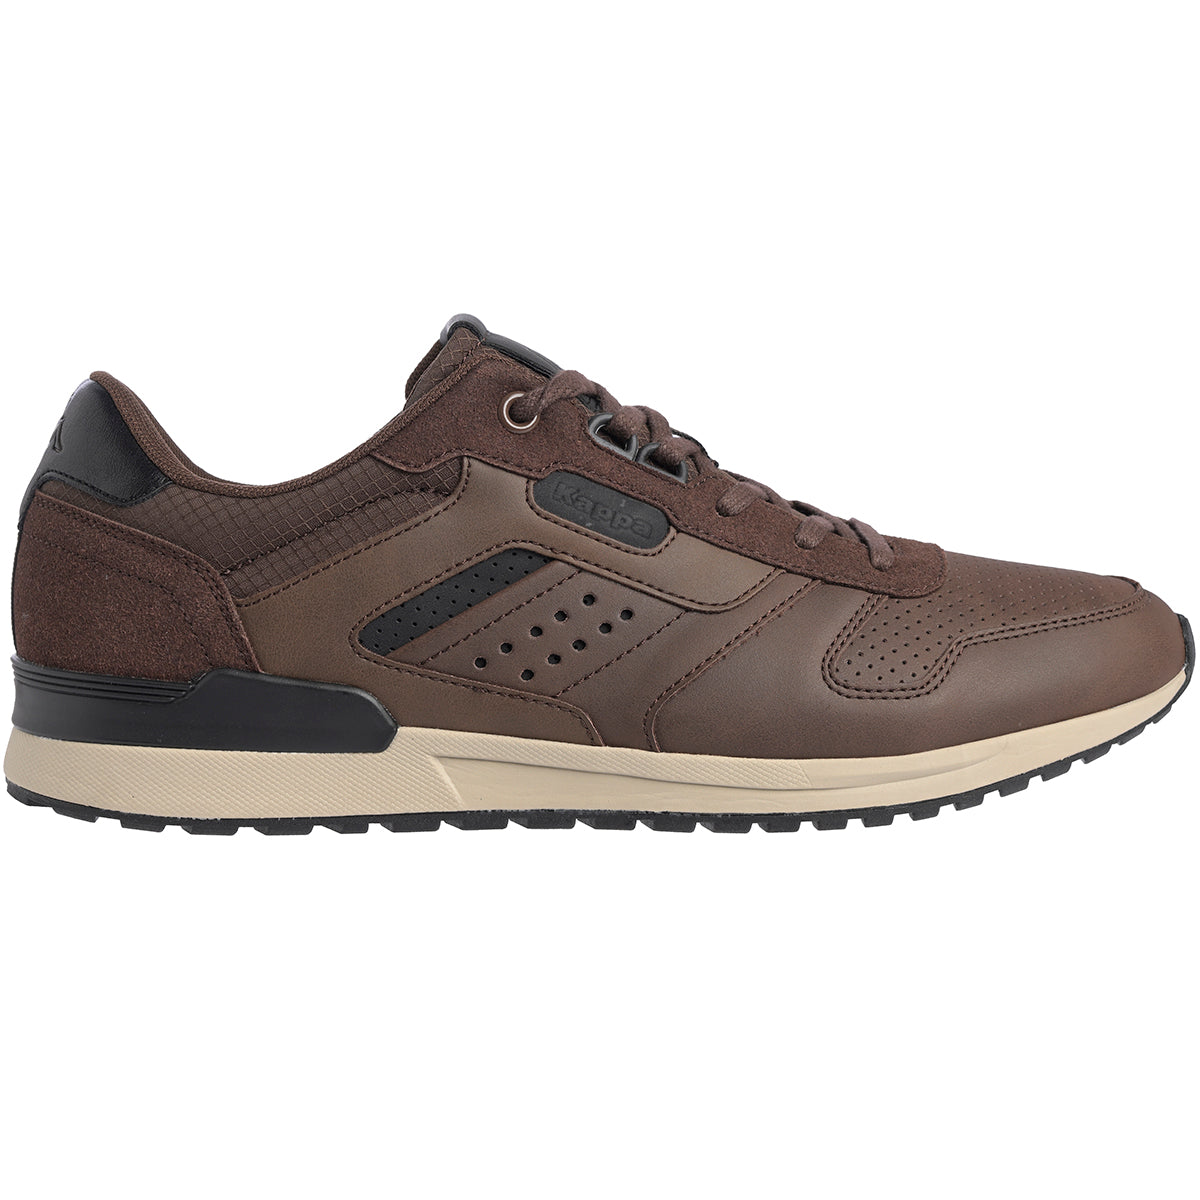 Chaussures lifestyle Midiano marron homme - Image 1